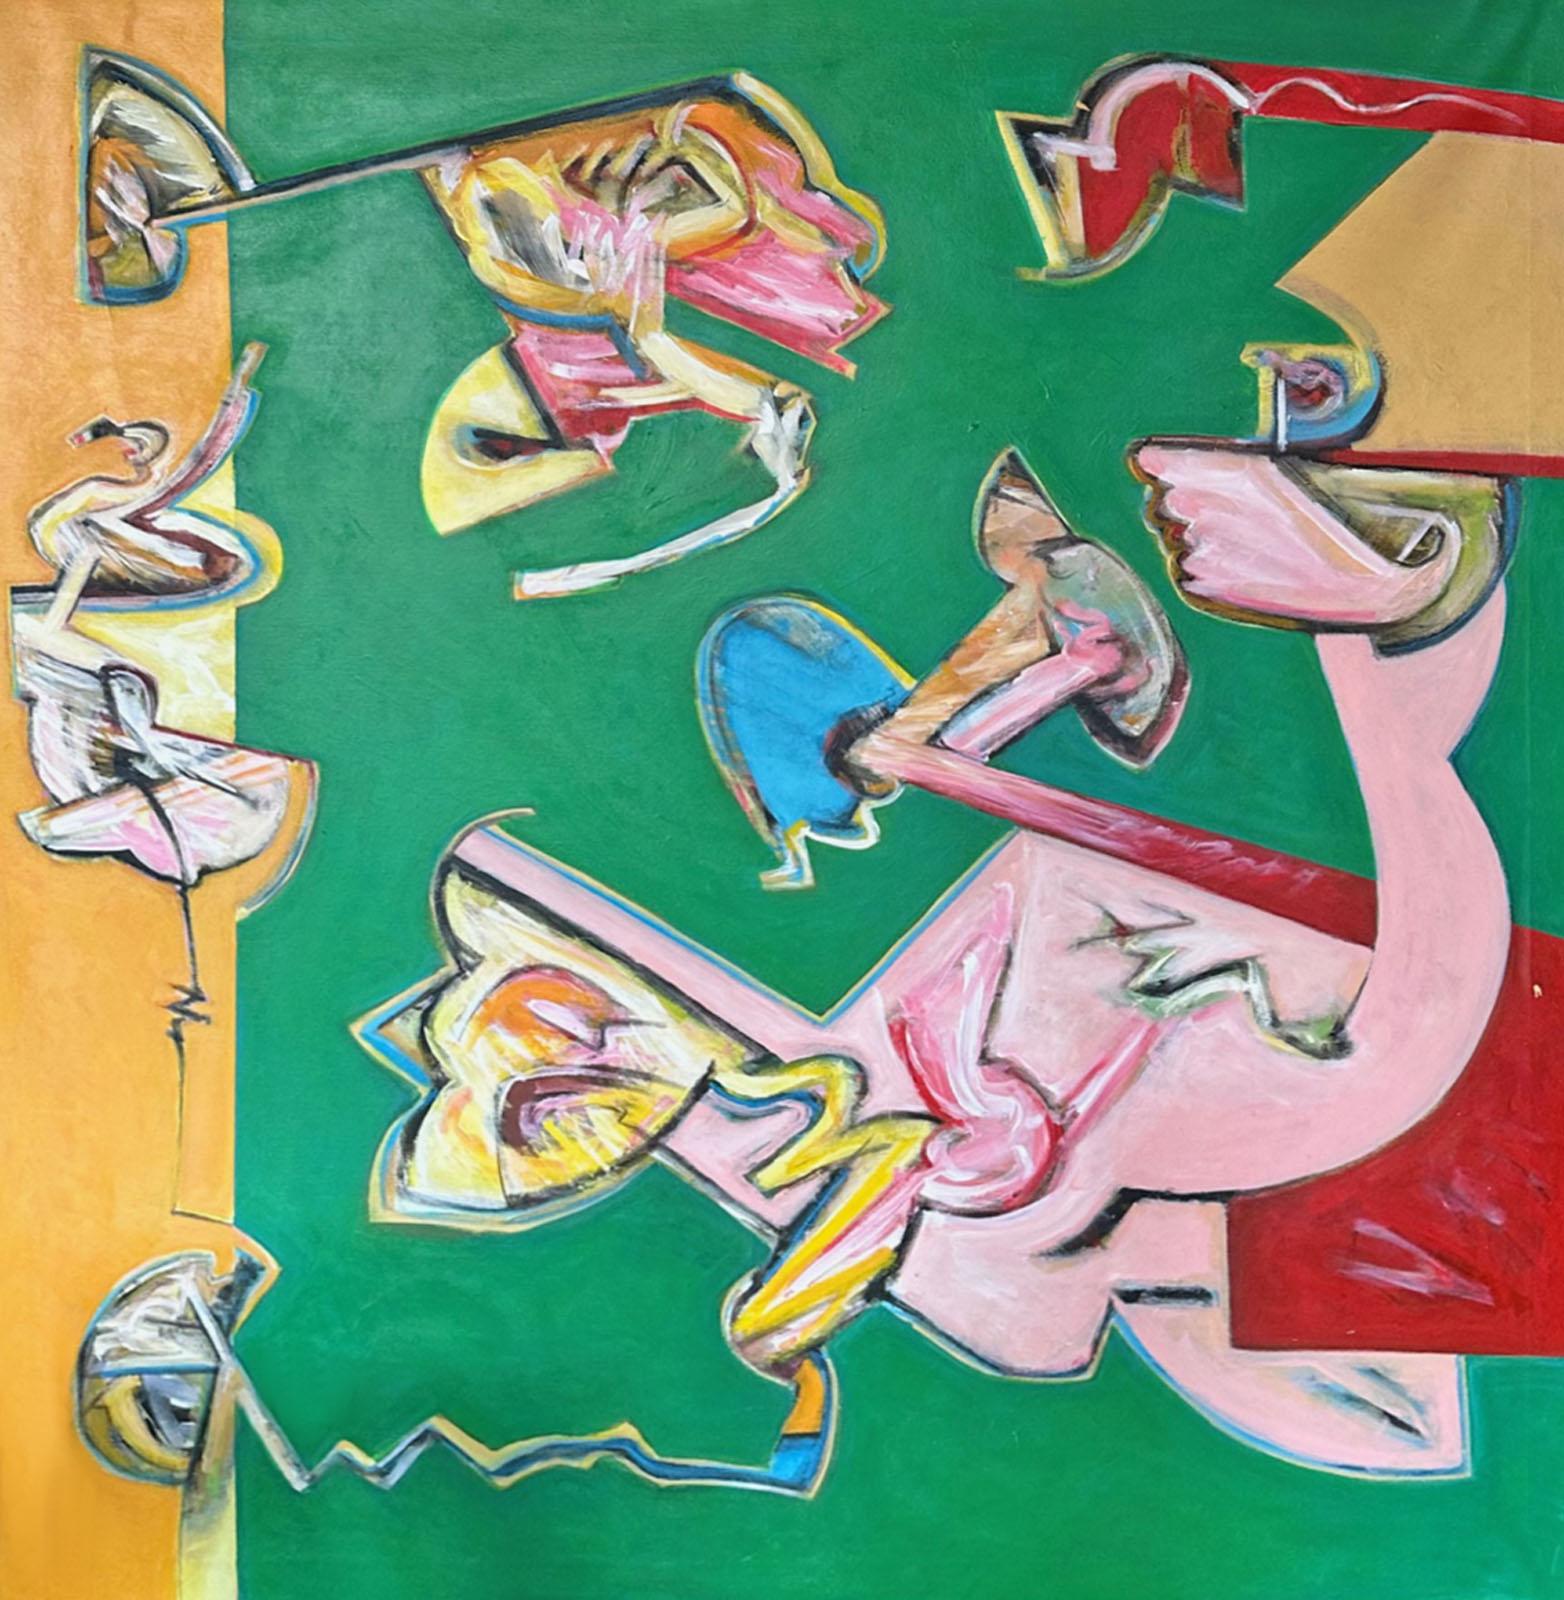 An acrylic on canvas painting by James L. Bruch (1942-2023). This abstract work has a green background punctuated with colorful shapes in pink, red, blue, and yellow. A stripe of yellow accents the painting to the left of the composition. Unsigned,